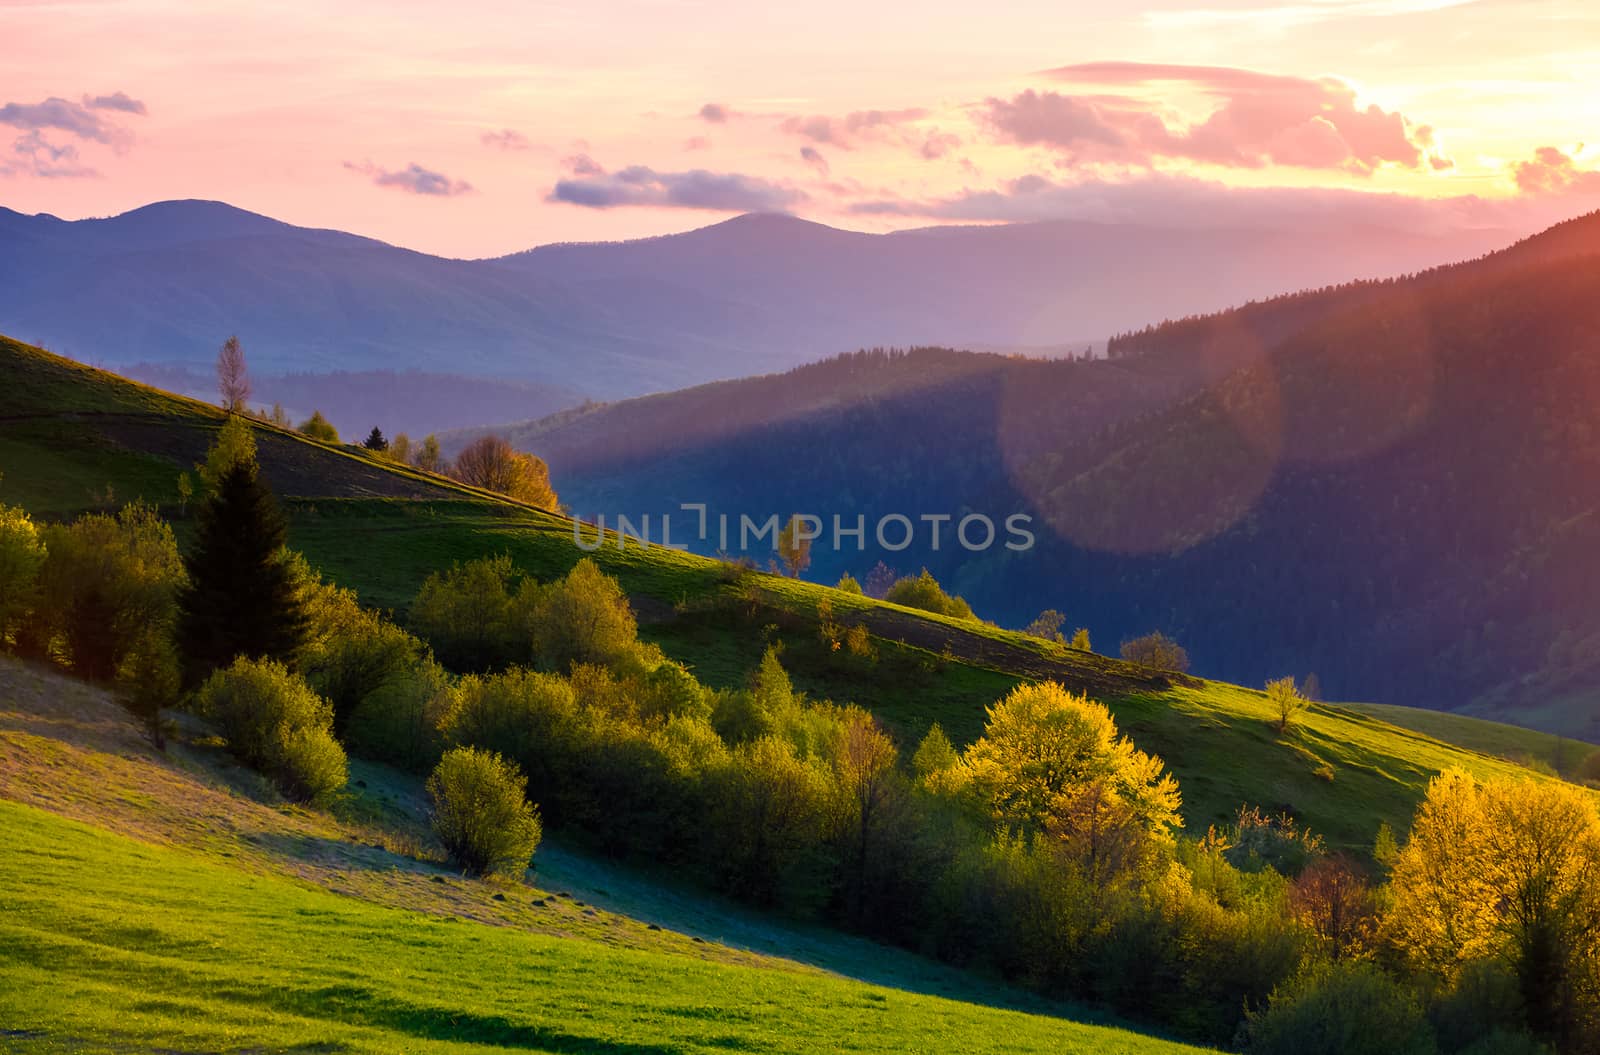 colorful sunset in Carpathian countryside. grassy hillsides with some trees in evening light. sky and fluffy clouds in pink light